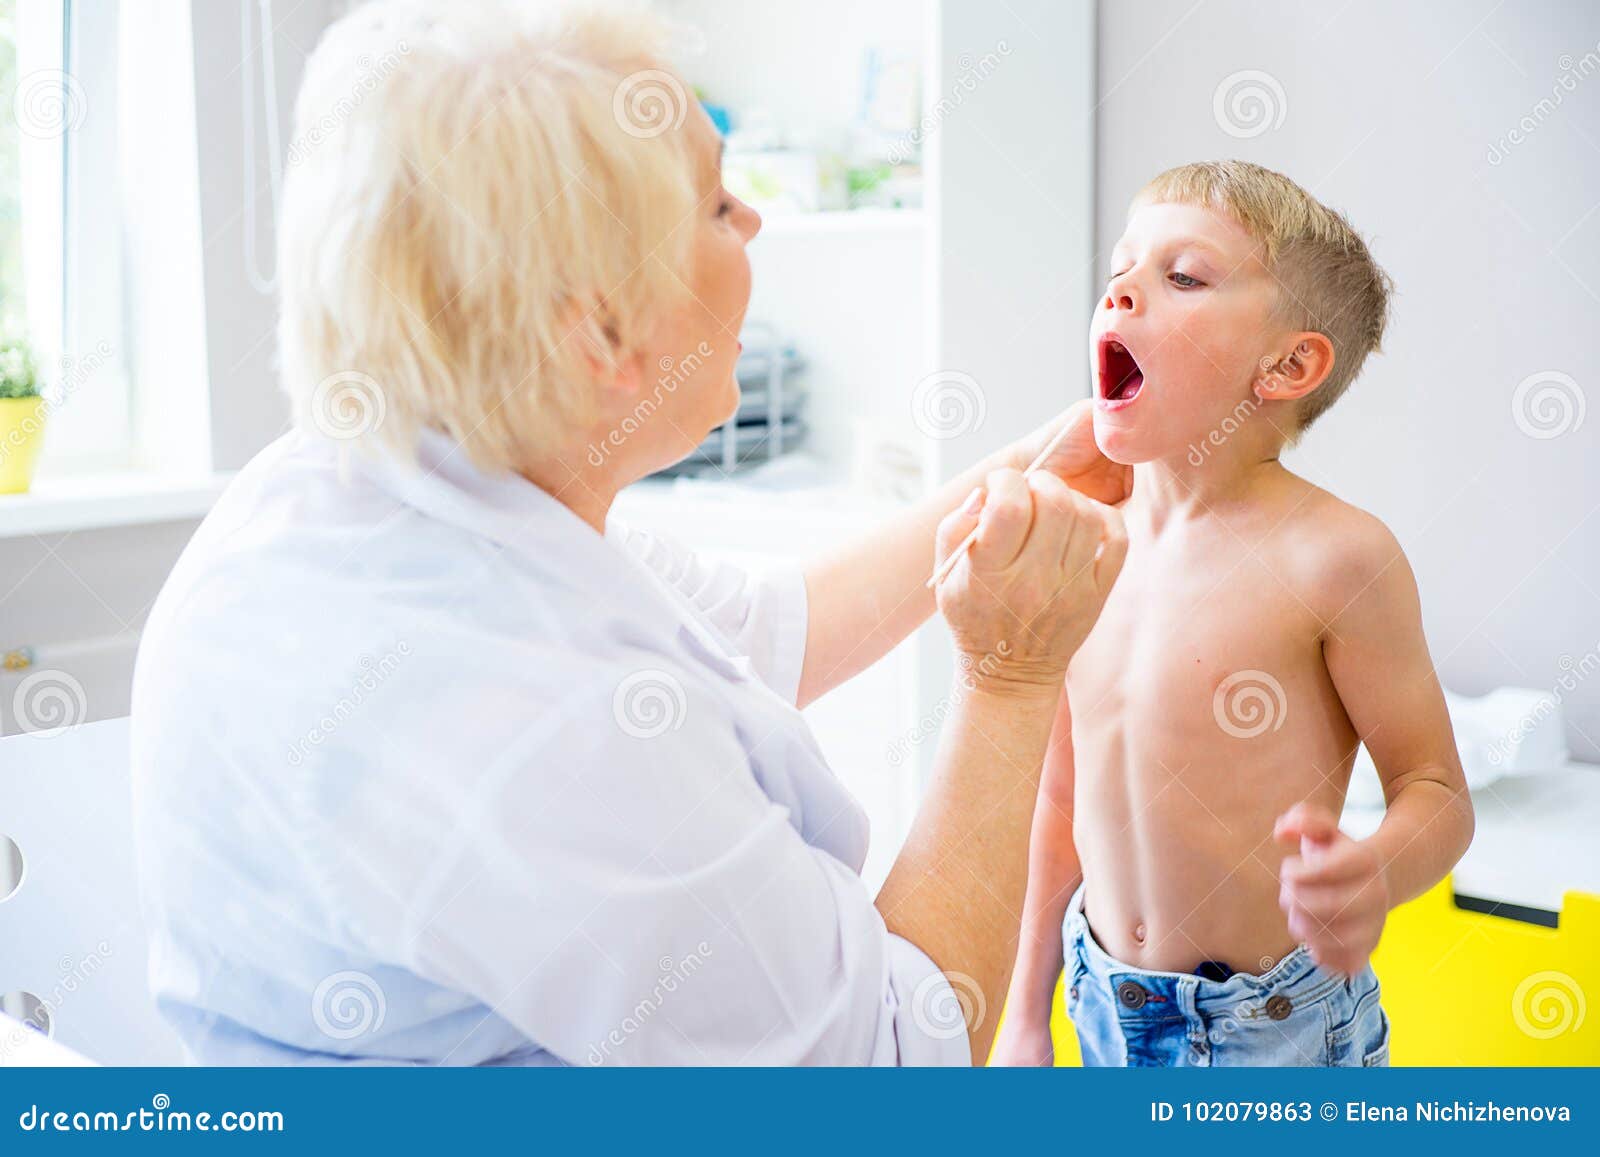 children-medical-clinic-kid-appointment-doctor-102079863